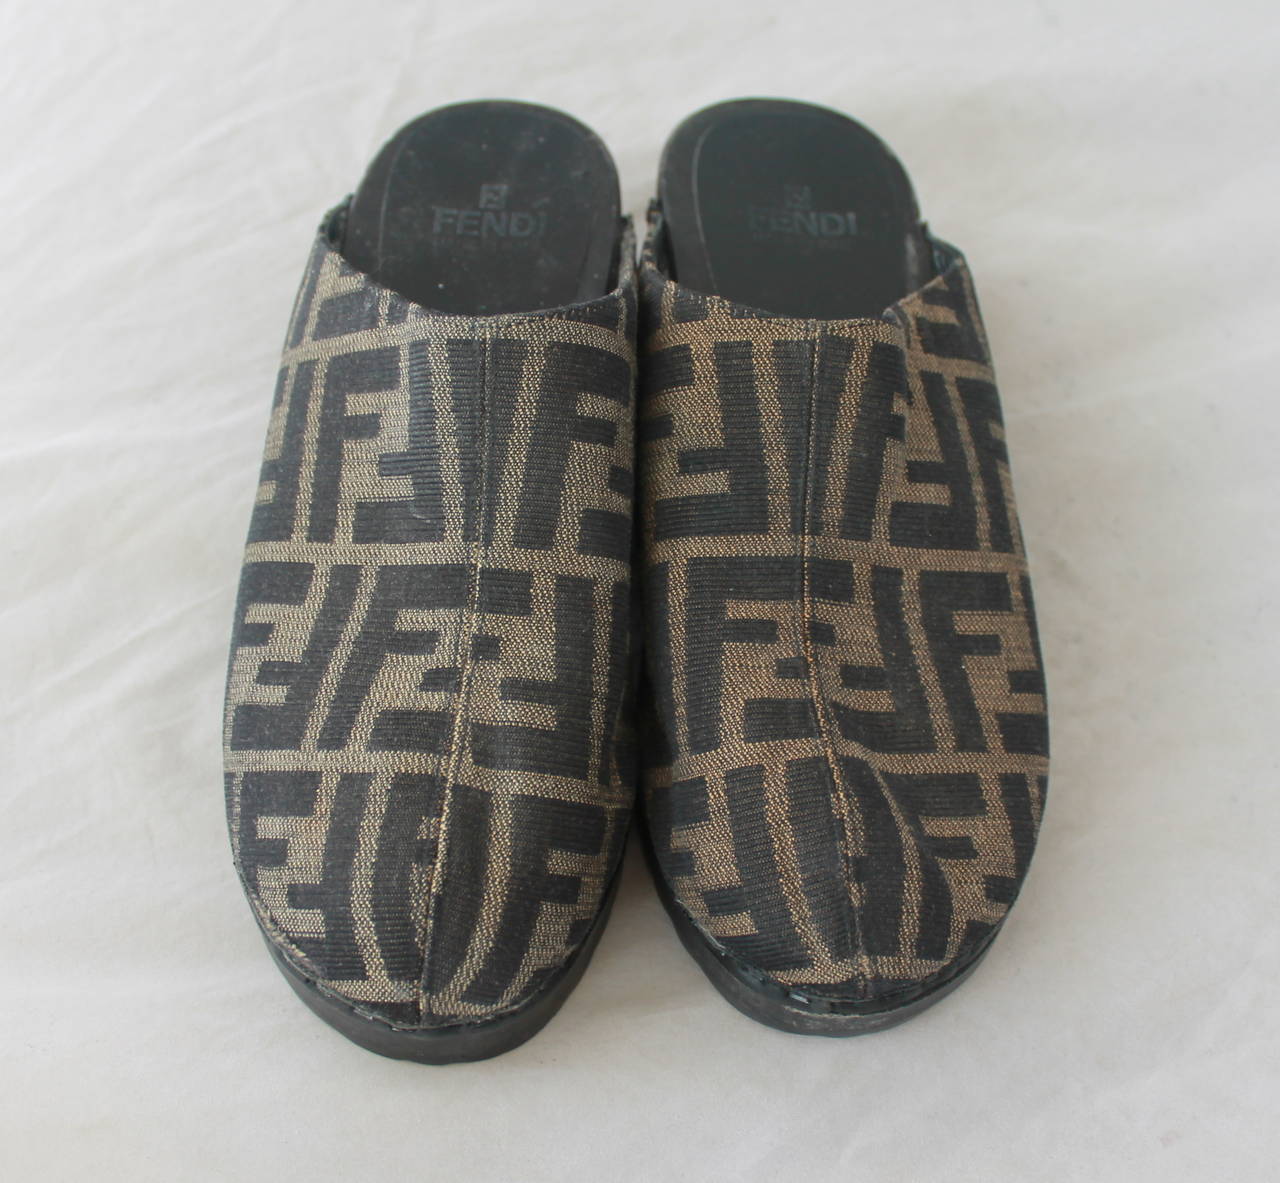 Fendi Brown Monogram Printed Fabric Clogs - 6. These shoes are in very good shape with minor wear on the bottom and minor marks on the large heel. The clog is hard and has a wooden look.